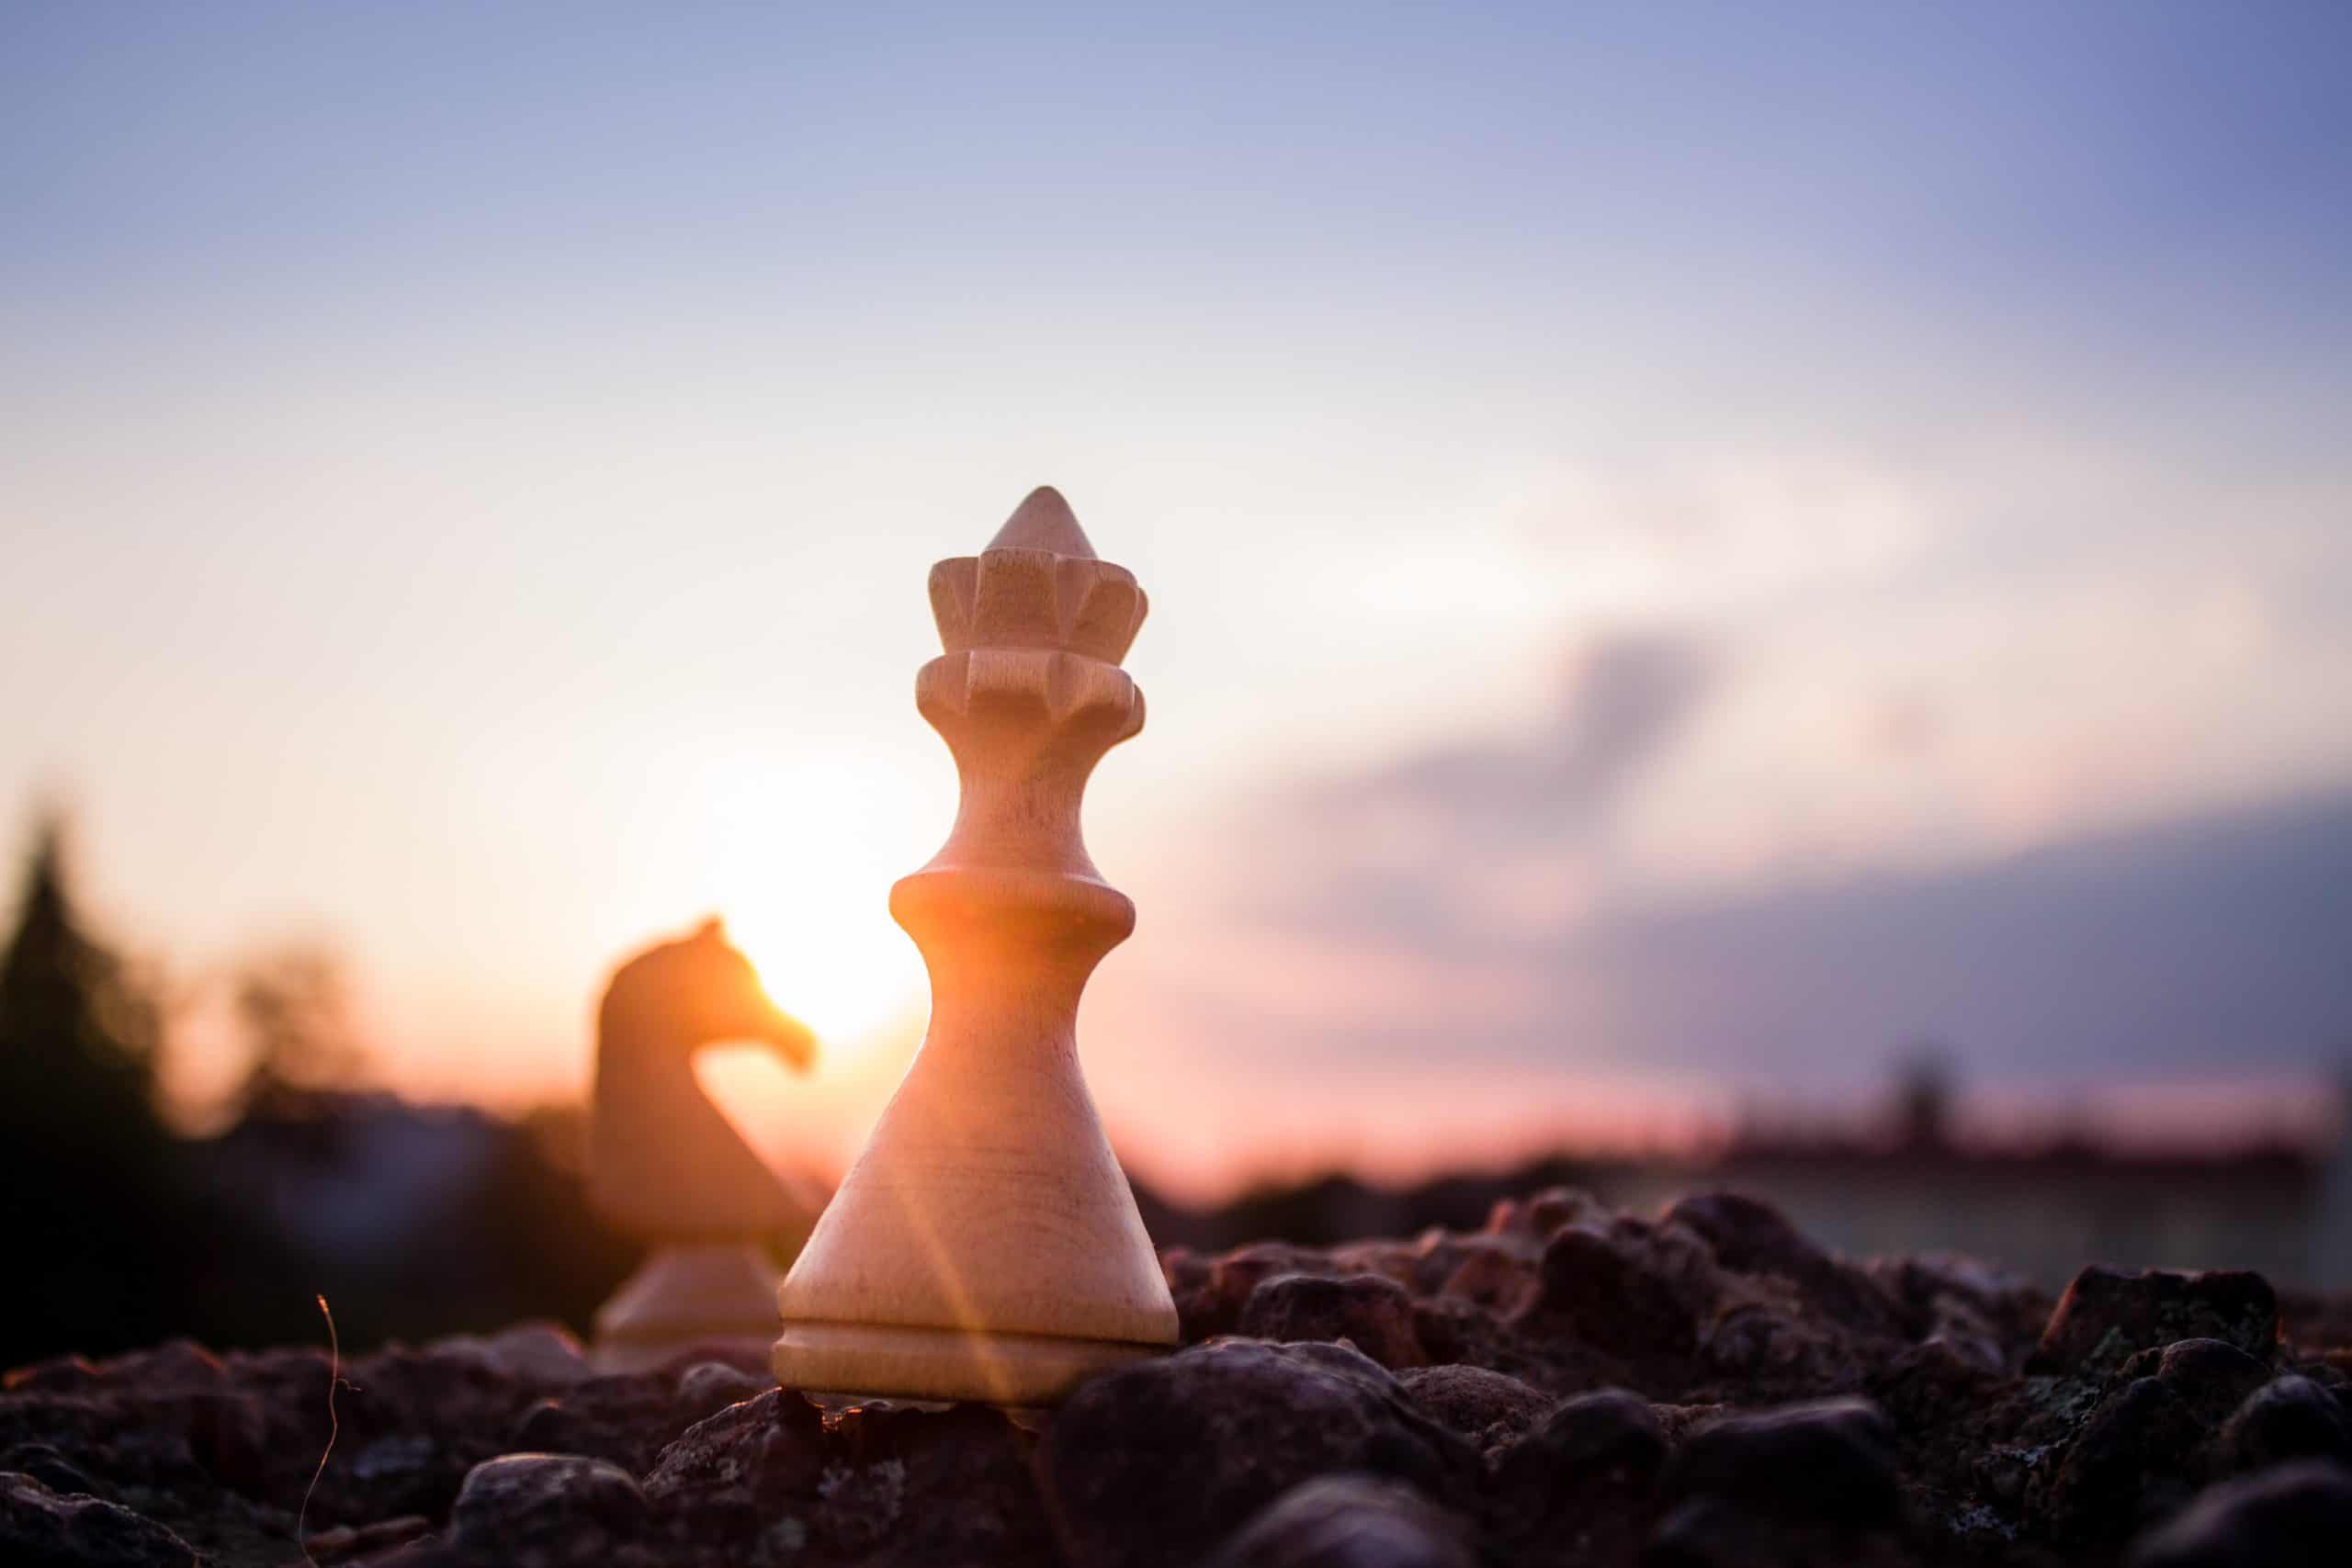 A chess piece sits on top of a rock at sunset.